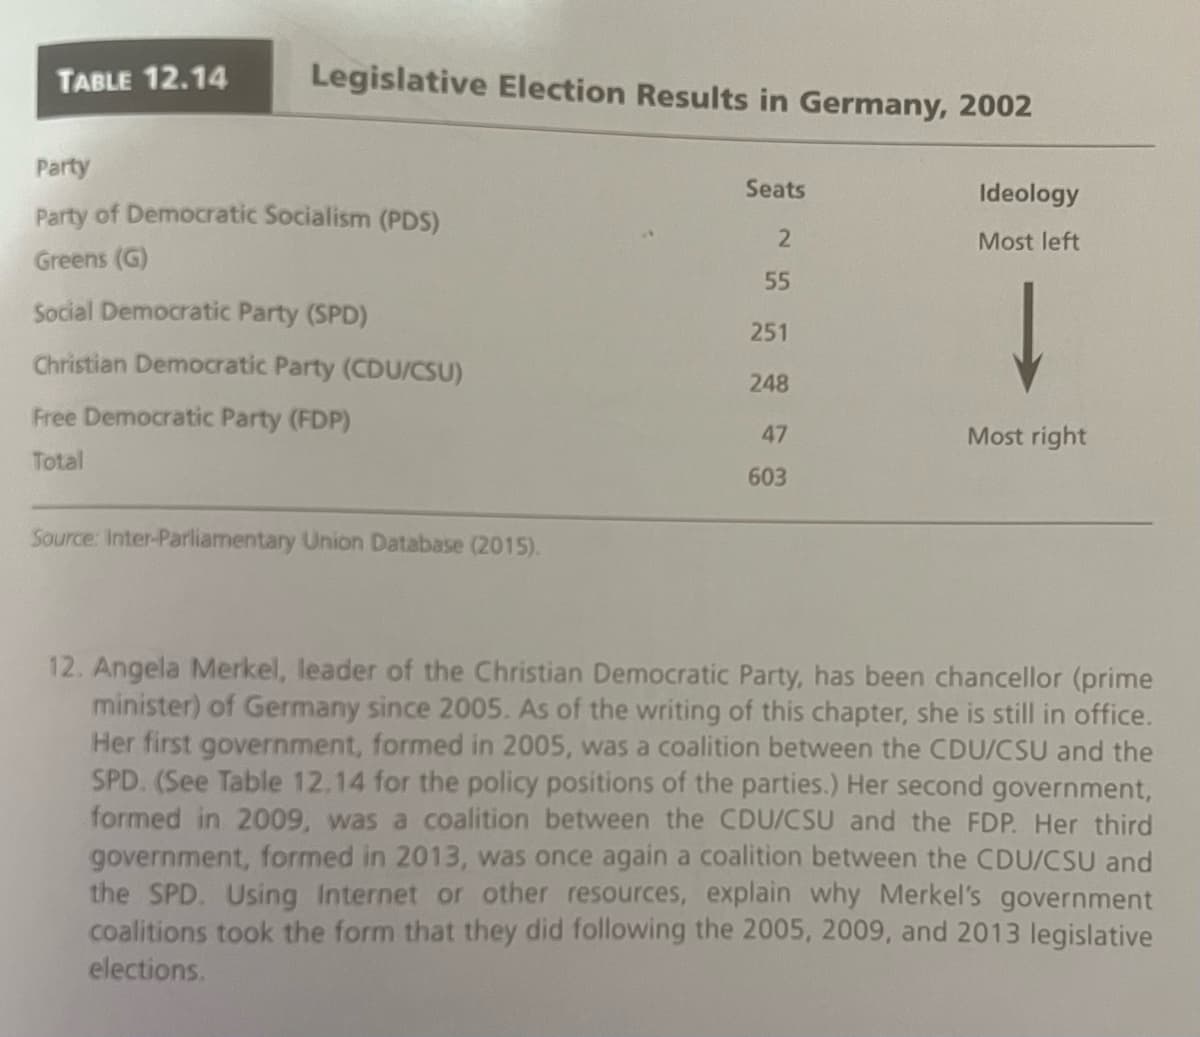 TABLE 12.14
Legislative Election Results in Germany, 2002
Party
Party of Democratic Socialism (PDS)
Greens (G)
Social Democratic Party (SPD)
Seats
Ideology
2
Most left
55
251
Christian Democratic Party (CDU/CSU)
248
Free Democratic Party (FDP)
Total
47
Most right
603
Source: Inter-Parliamentary Union Database (2015).
12. Angela Merkel, leader of the Christian Democratic Party, has been chancellor (prime
minister) of Germany since 2005. As of the writing of this chapter, she is still in office.
Her first government, formed in 2005, was a coalition between the CDU/CSU and the
SPD. (See Table 12.14 for the policy positions of the parties.) Her second government,
formed in 2009, was a coalition between the CDU/CSU and the FDP. Her third
government, formed in 2013, was once again a coalition between the CDU/CSU and
the SPD. Using Internet or other resources, explain why Merkel's government
coalitions took the form that they did following the 2005, 2009, and 2013 legislative
elections.